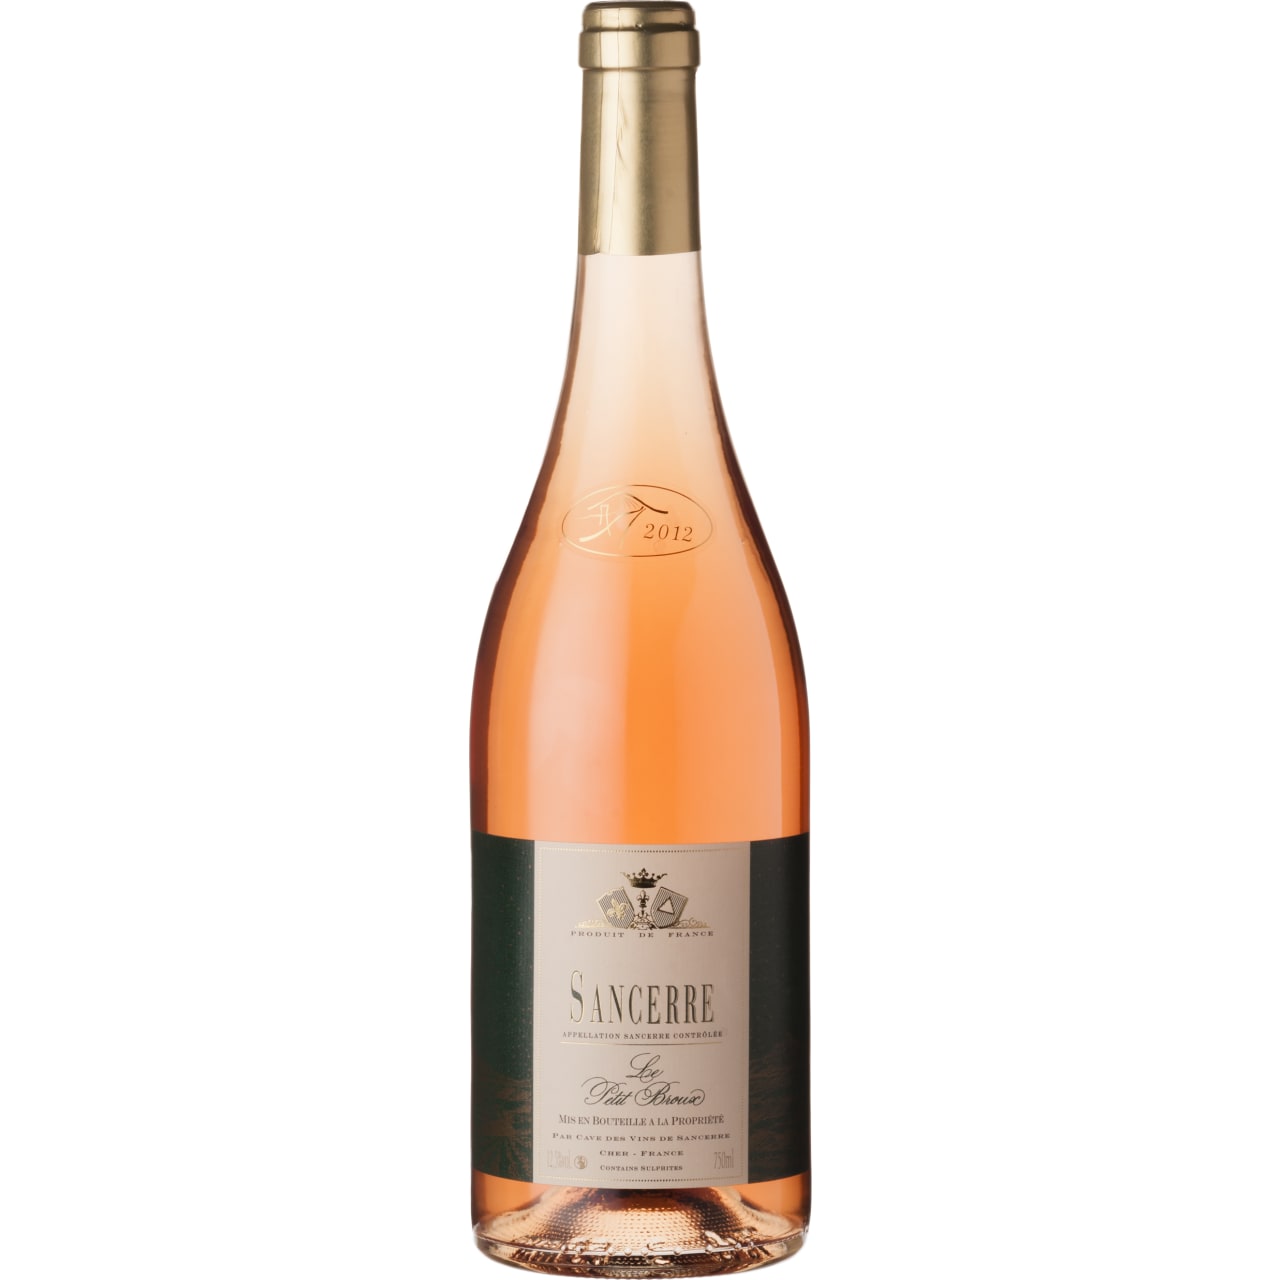 Glowing pink rosé from Pinot Noir, fragrant and appetising, with delicious aromas of wild strawberry, peach and redcurrant.